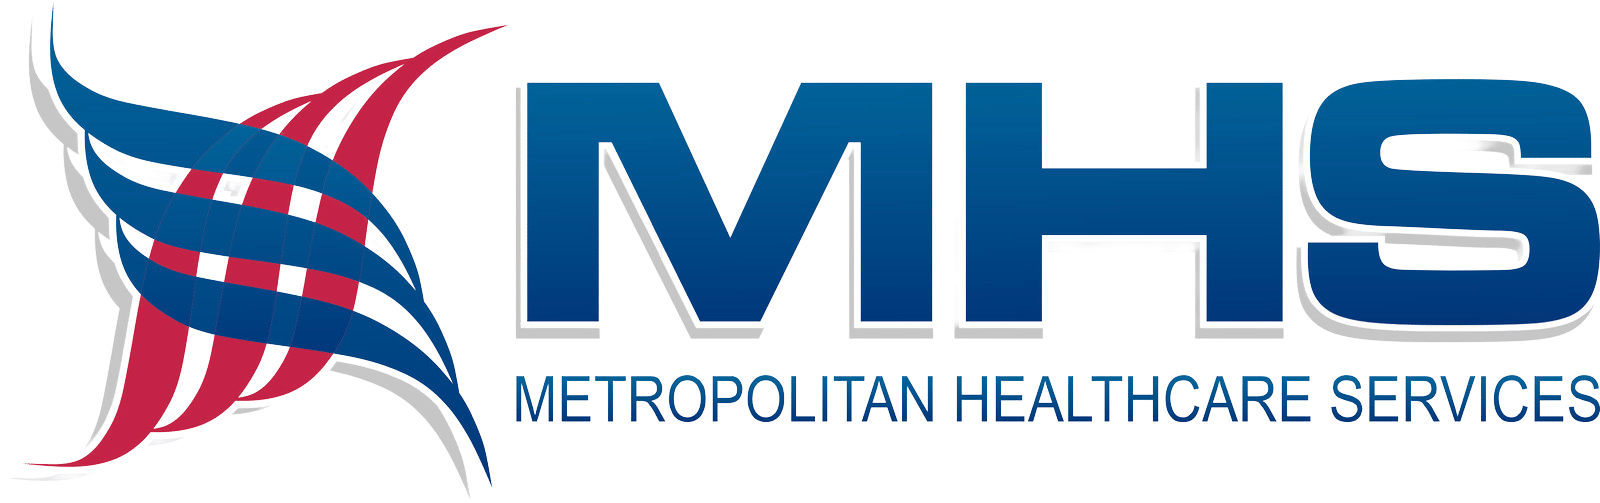 MHS Company Logo - Full Page with Bleeds - Edited